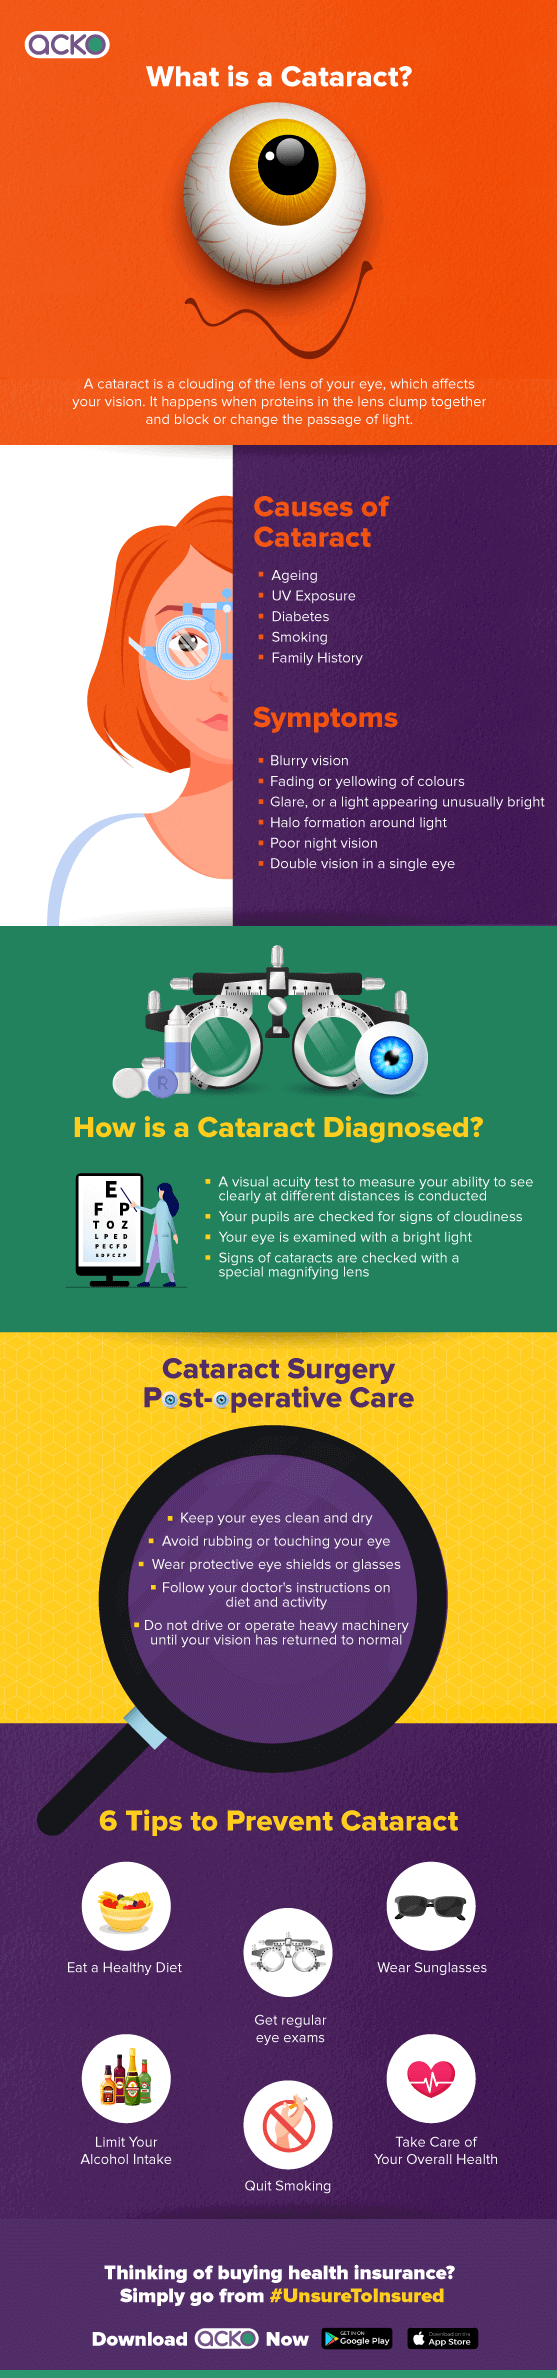 What is Cataract